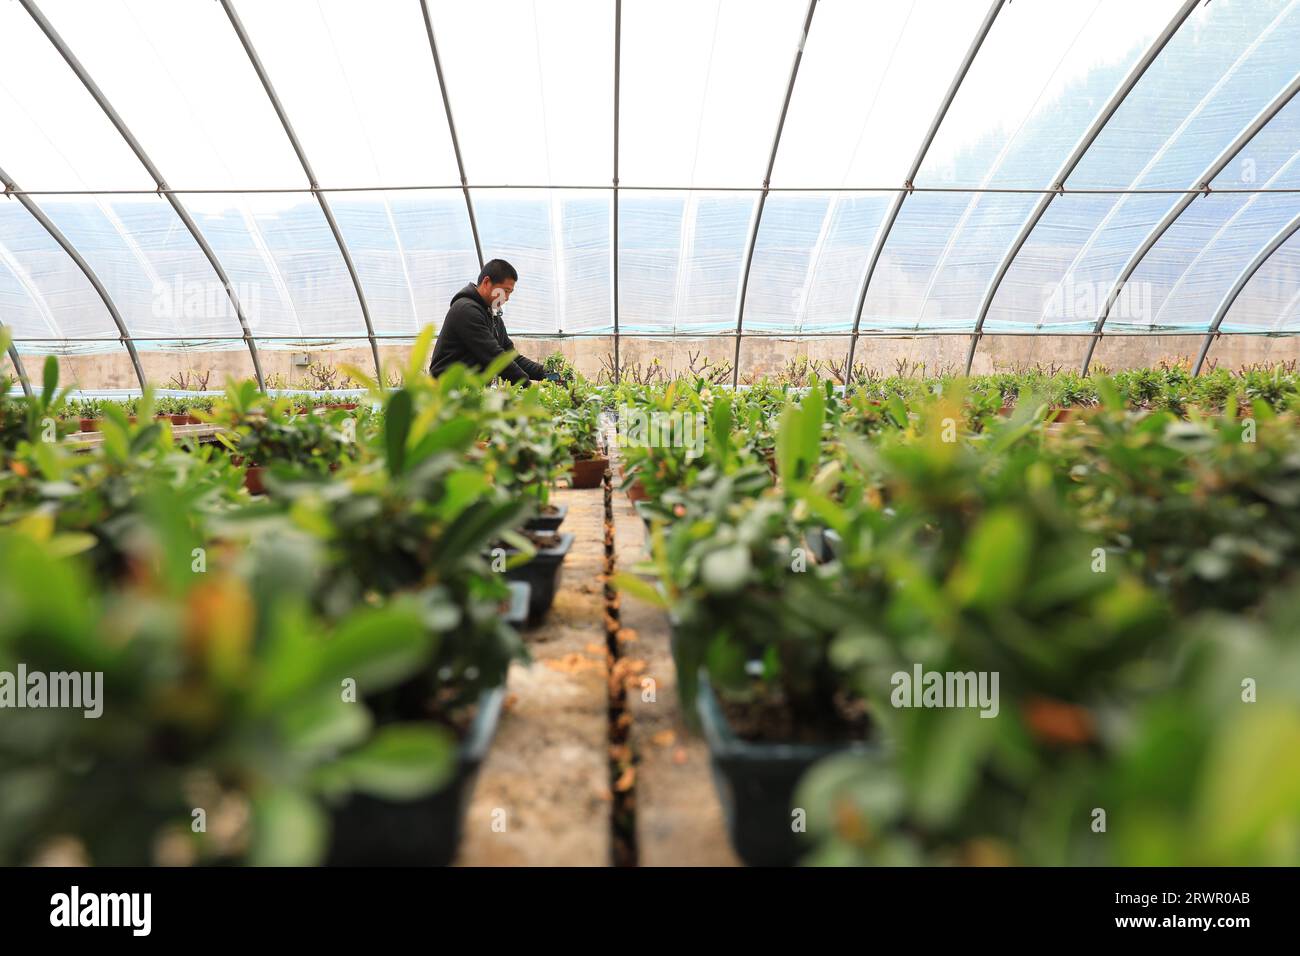 LUANNAN COUNTY, China - May 10, 2022: A gardener is carefully observing the growth and development of Pyracantha bonsai in a nursery, North China Stock Photo